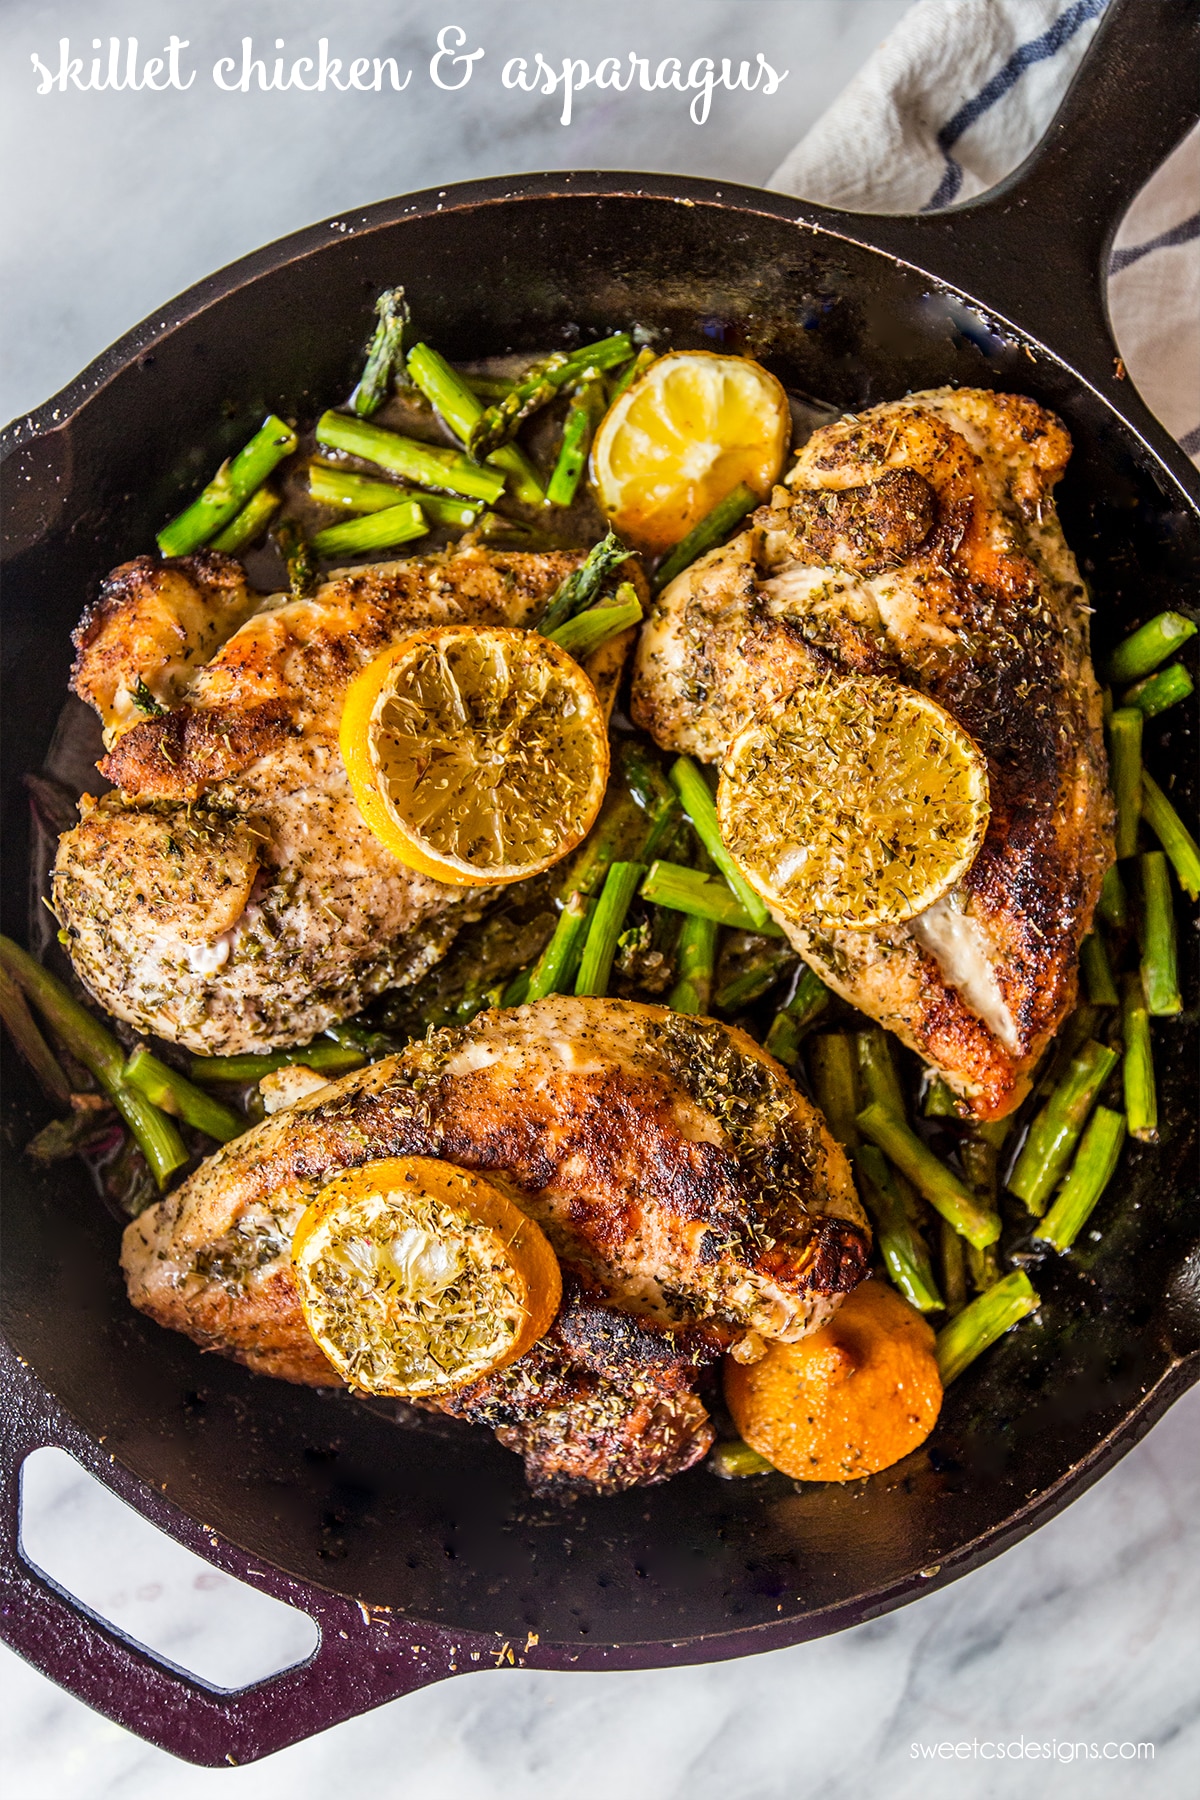 One Pot Chicken and Asparagus Sweet C's Designs